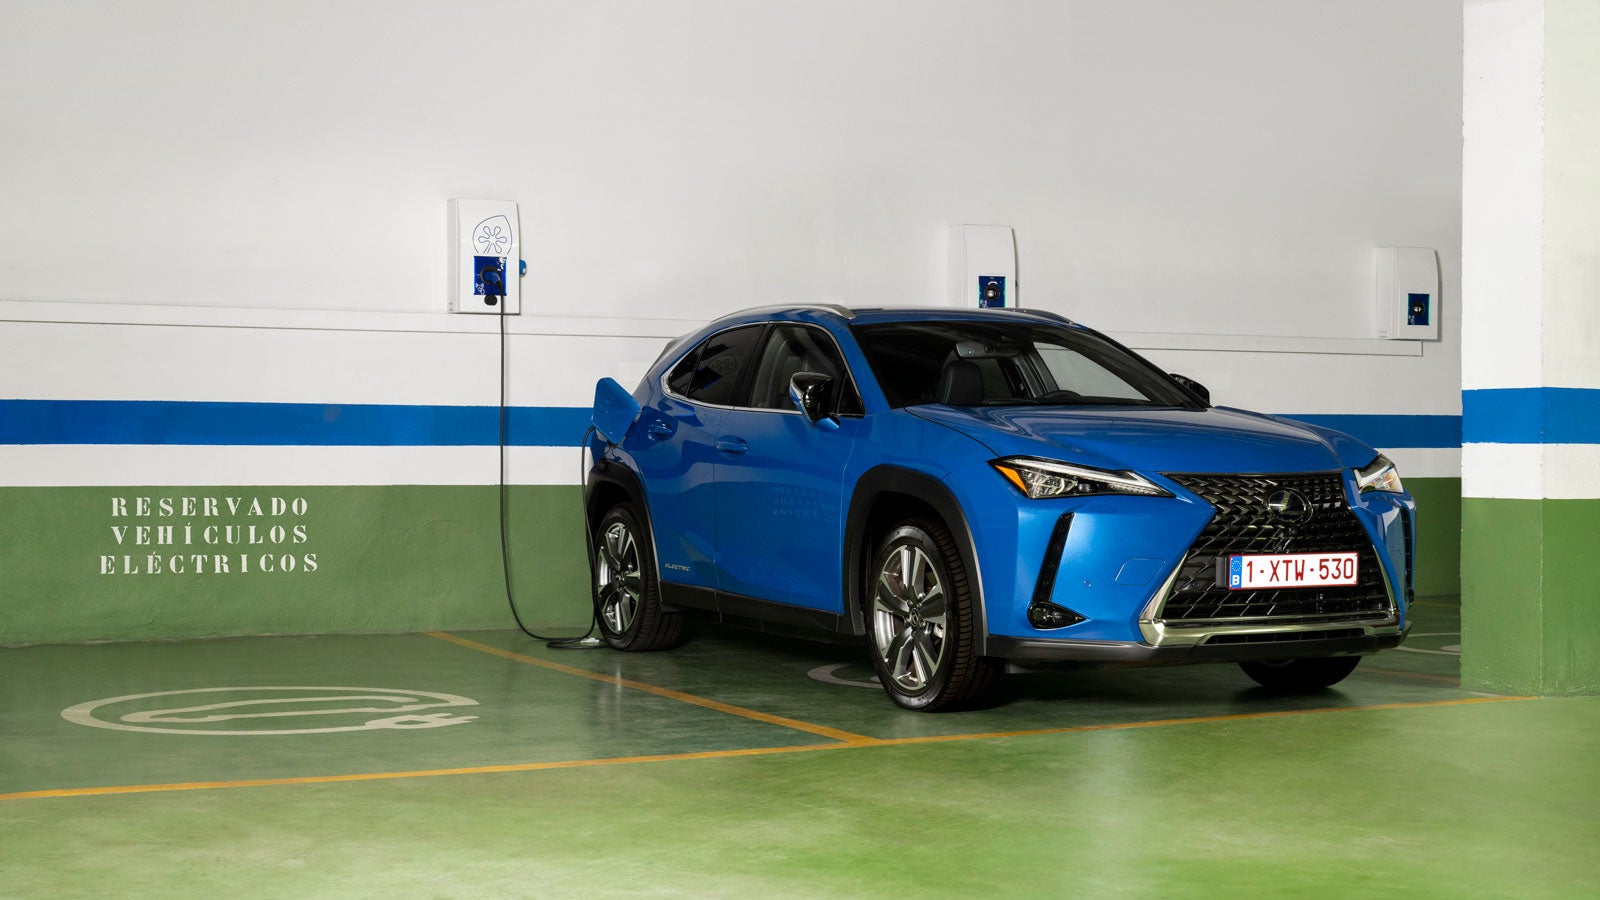 Lexus Is Developing a ‘Manual Transmission’ for High-Performance EVs